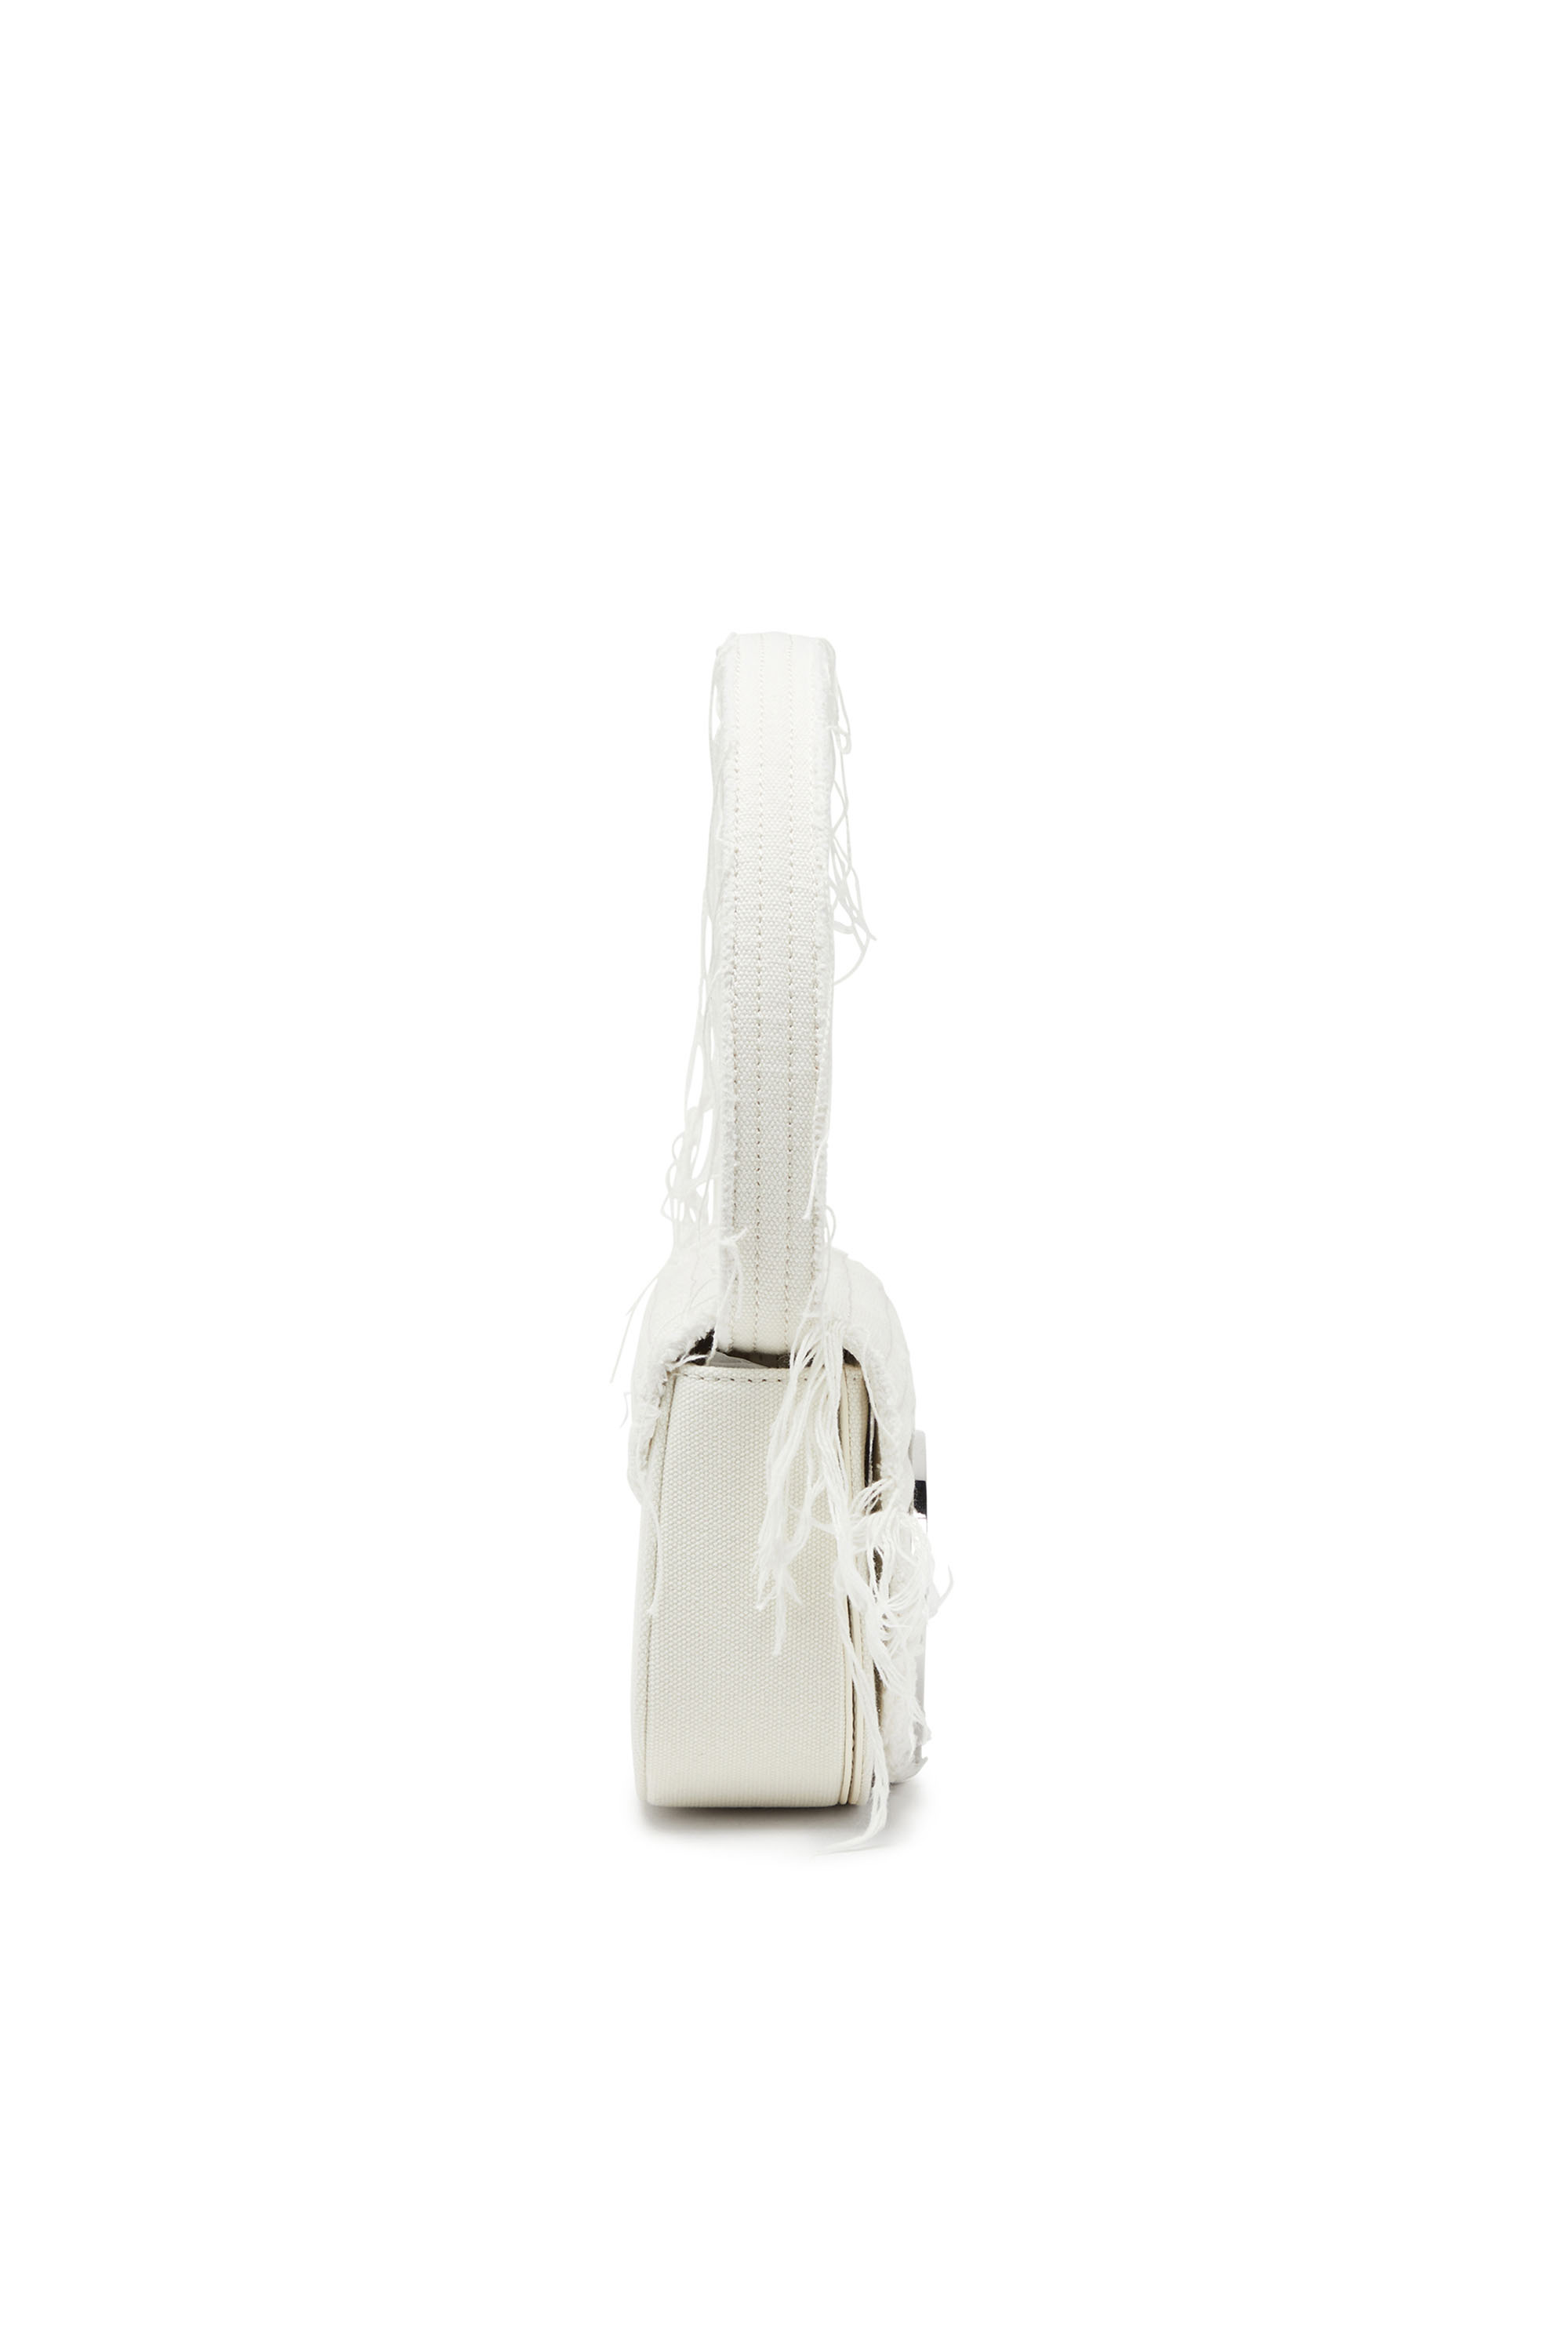 Diesel - 1DR, Woman 1DR-Iconic shoulder bag in canvas and leather in White - Image 3